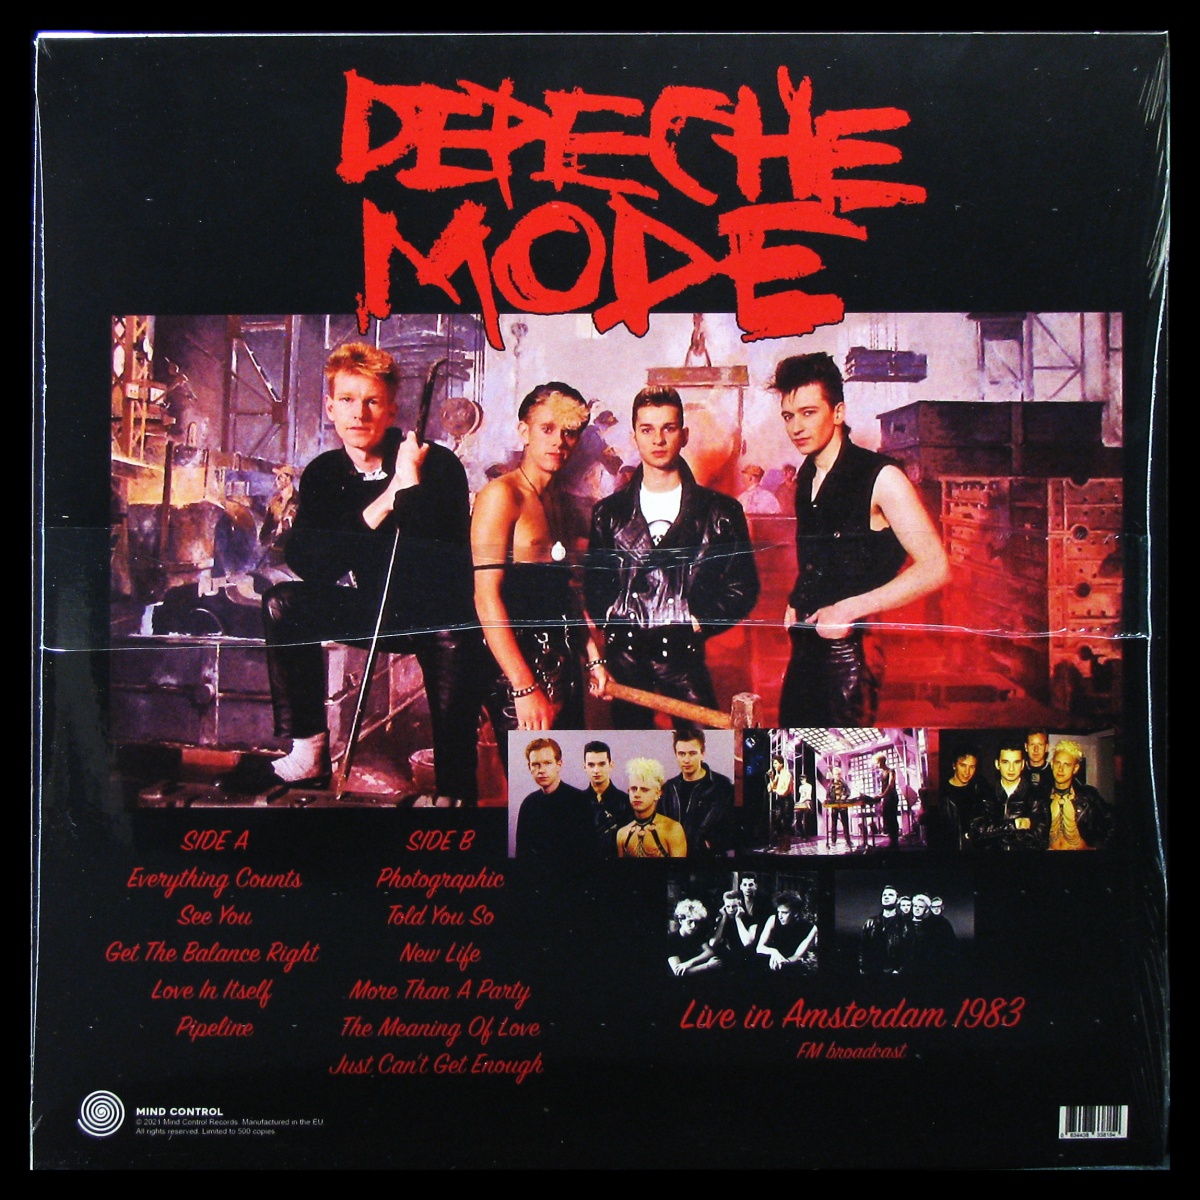 LP Depeche Mode — More Than A Party In Amsterdam (Live 1983 - FM Broadcast) фото 2